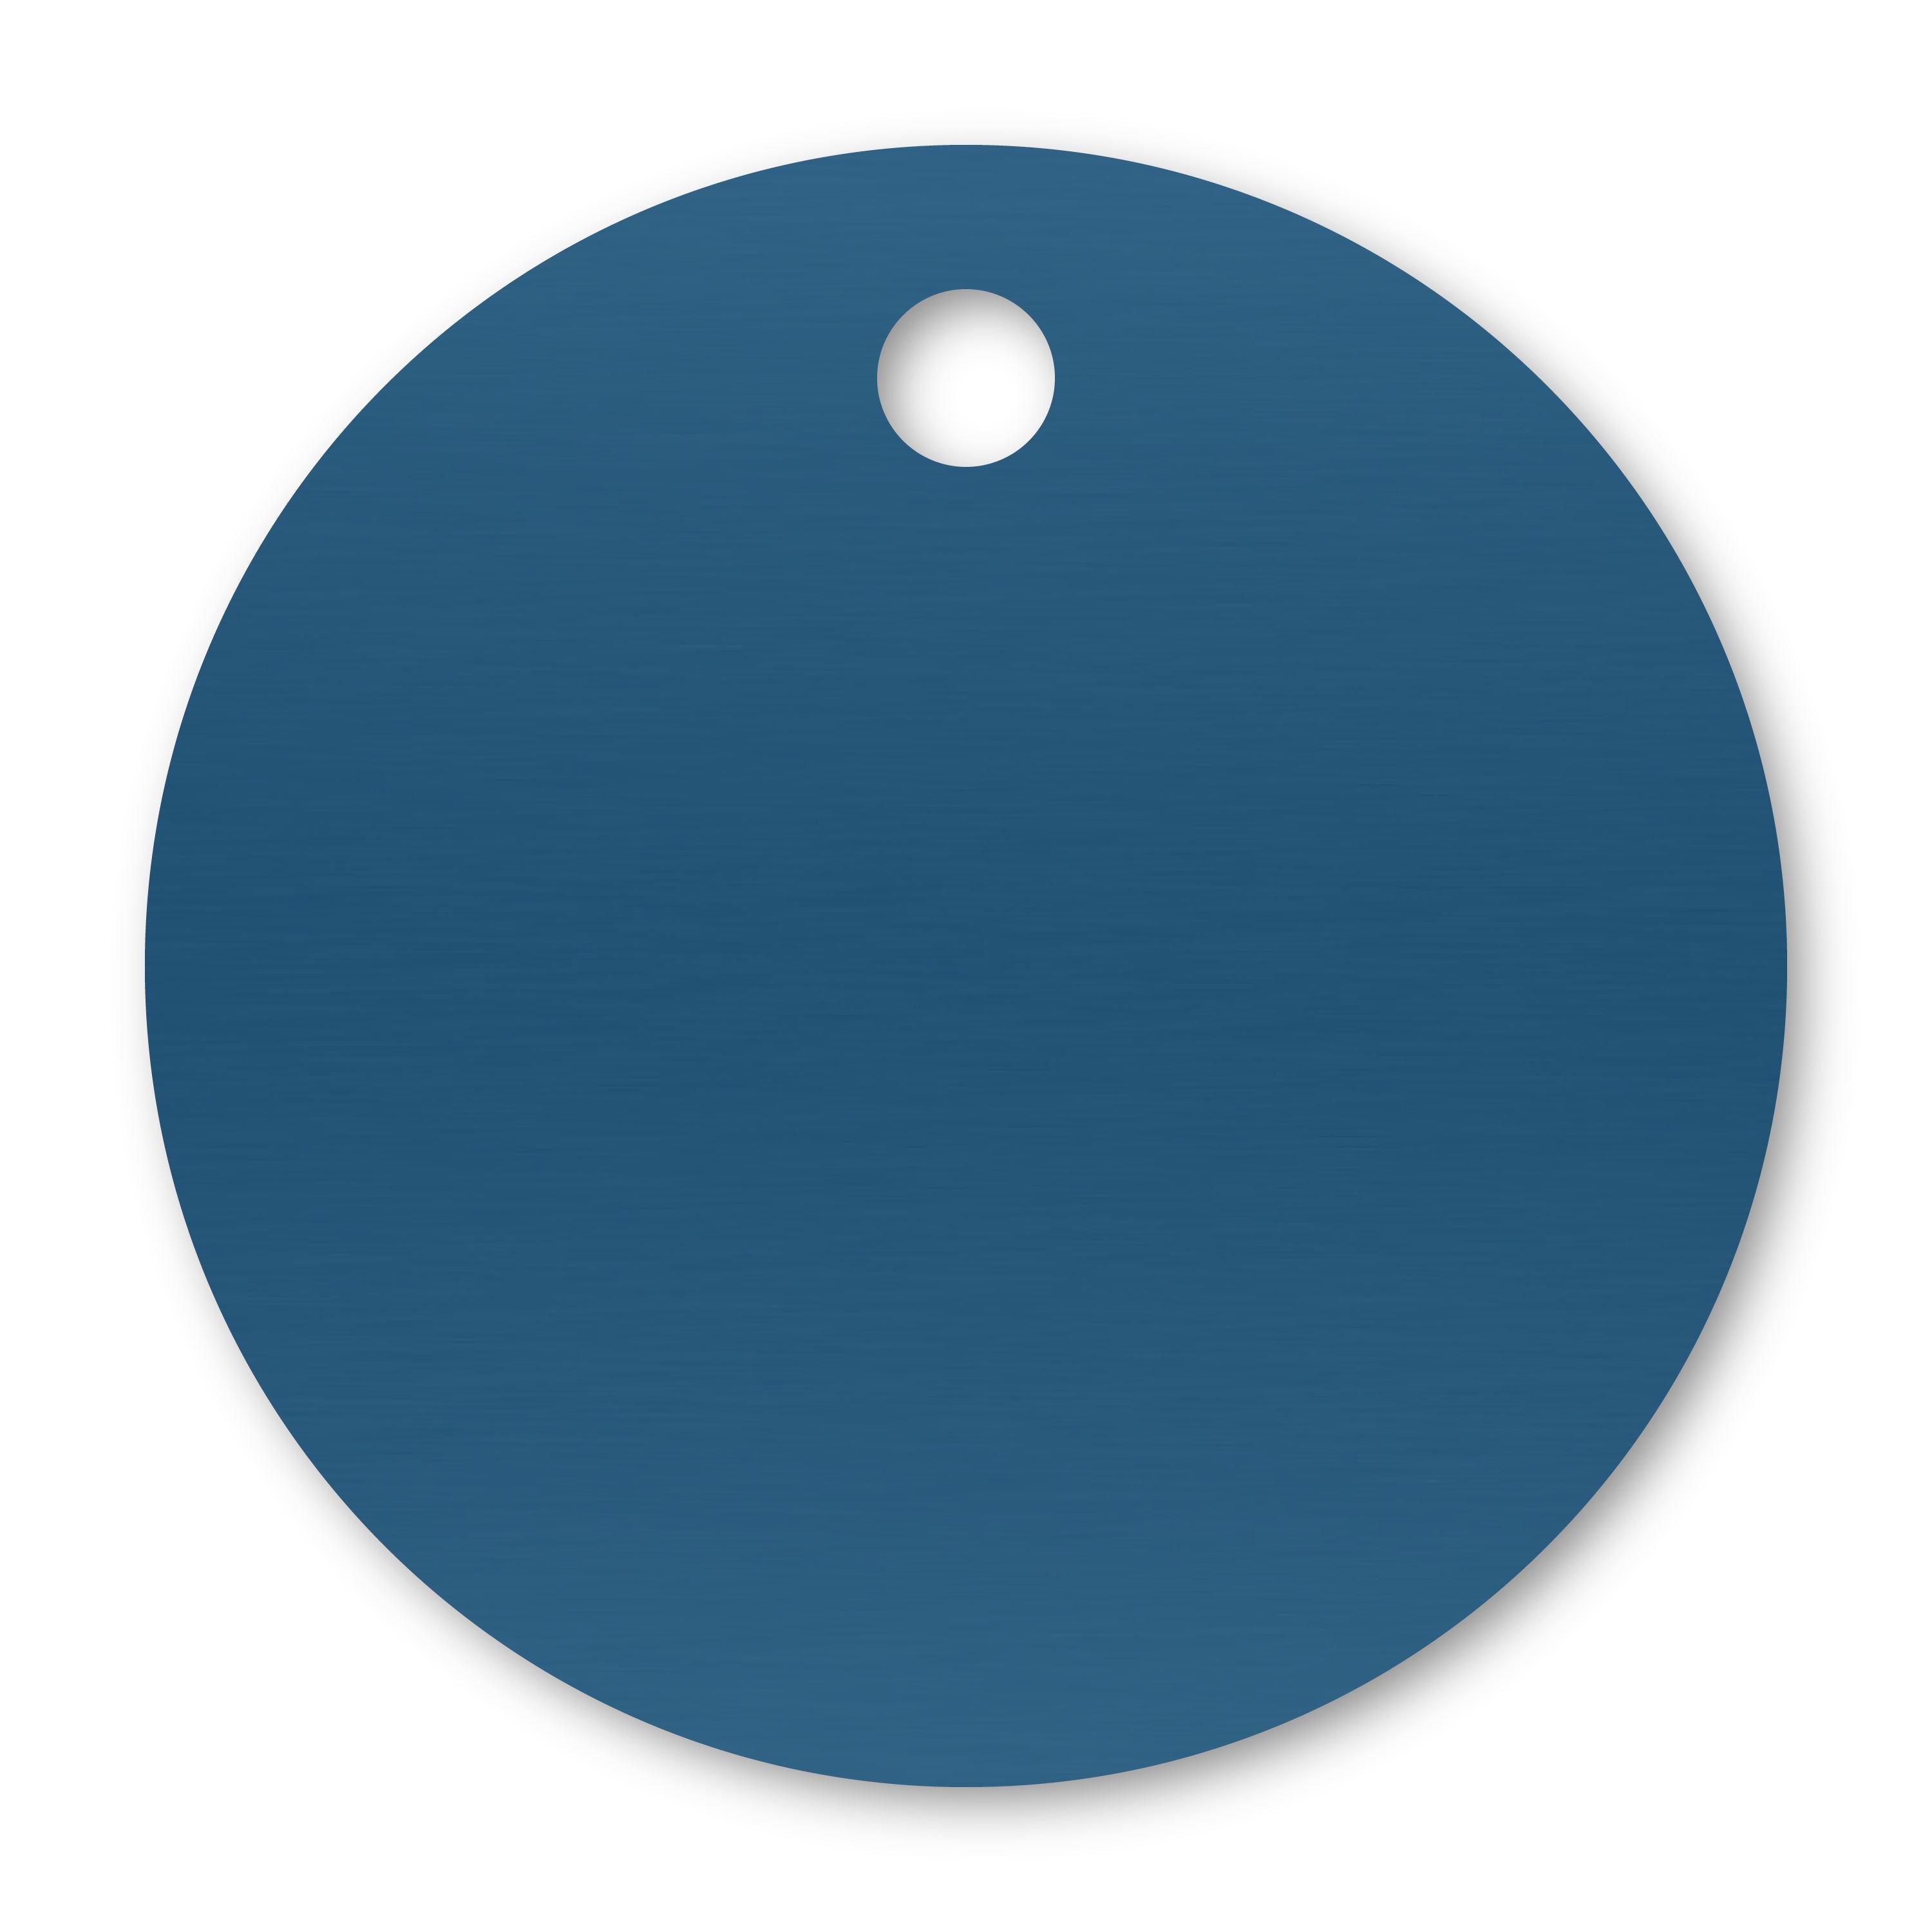 Anodized Aluminum Round Tags, 1" with 1/8" Hole, Laser Engraved Metal Tags Craftworks NW Blue 